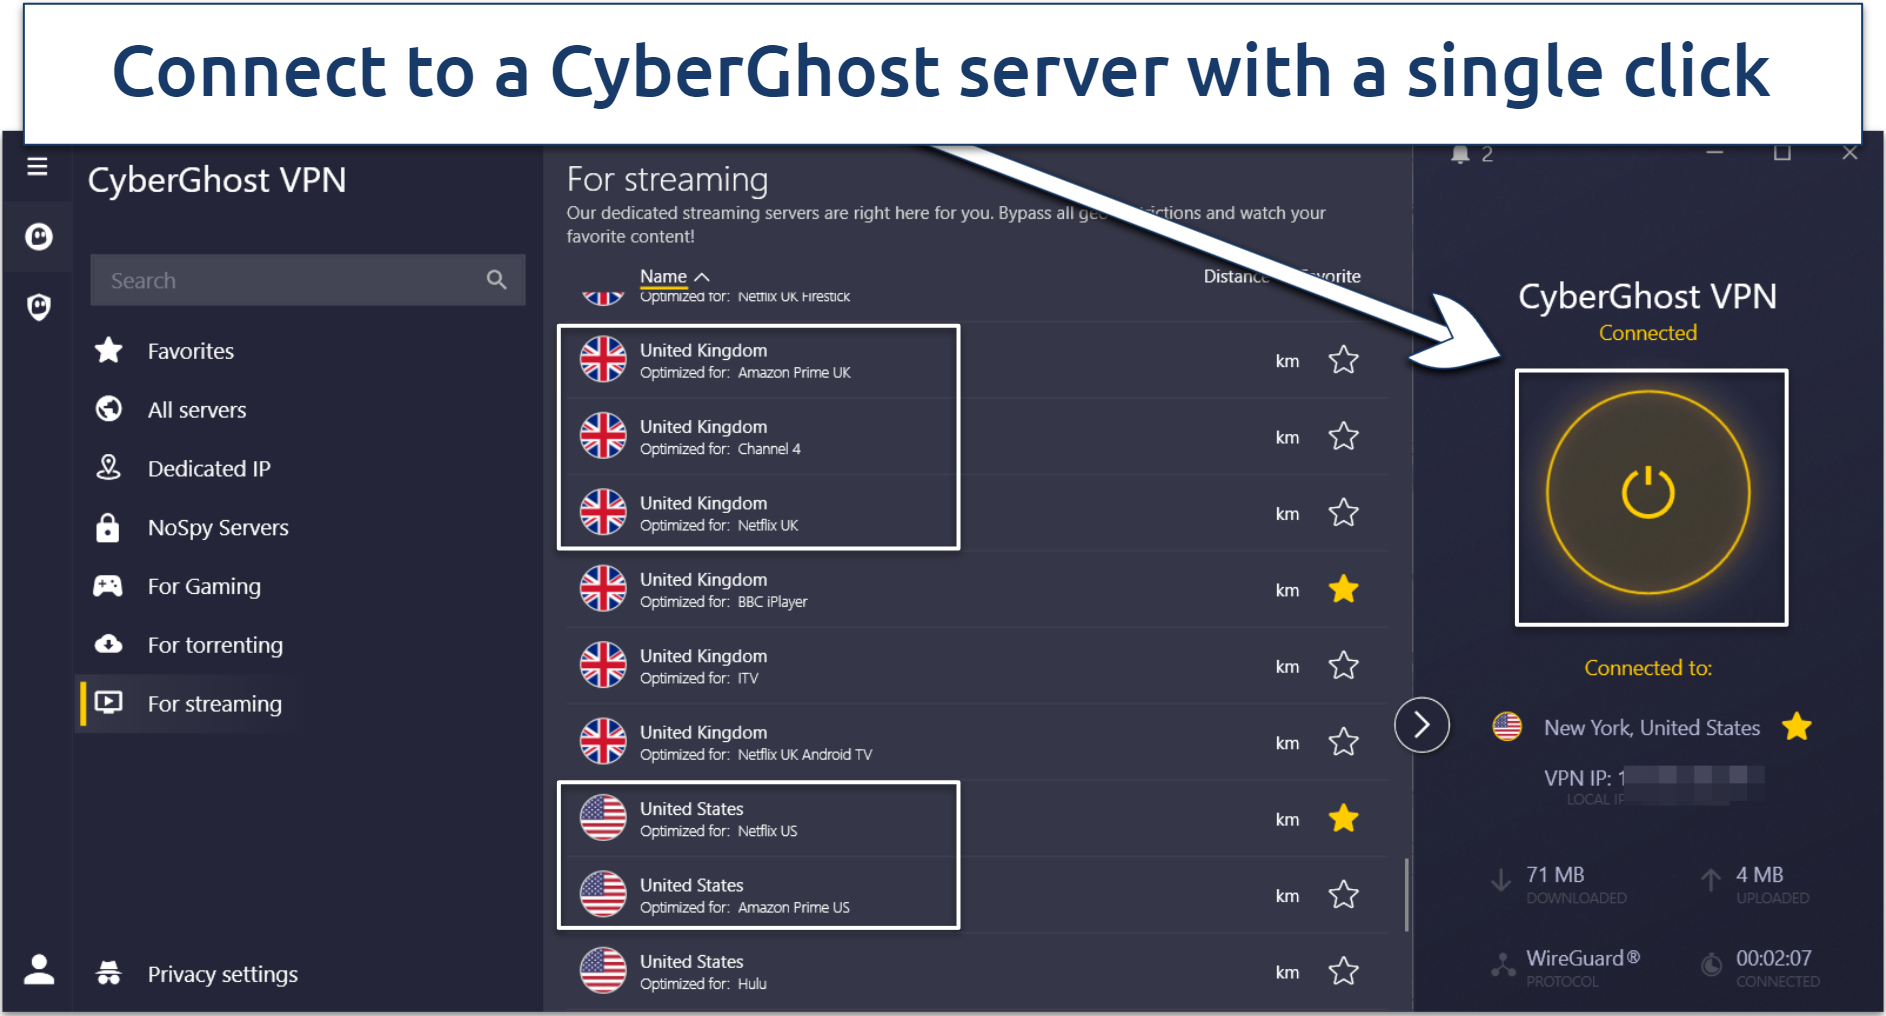 Screenshot of CyberGhost interface with streaming servers